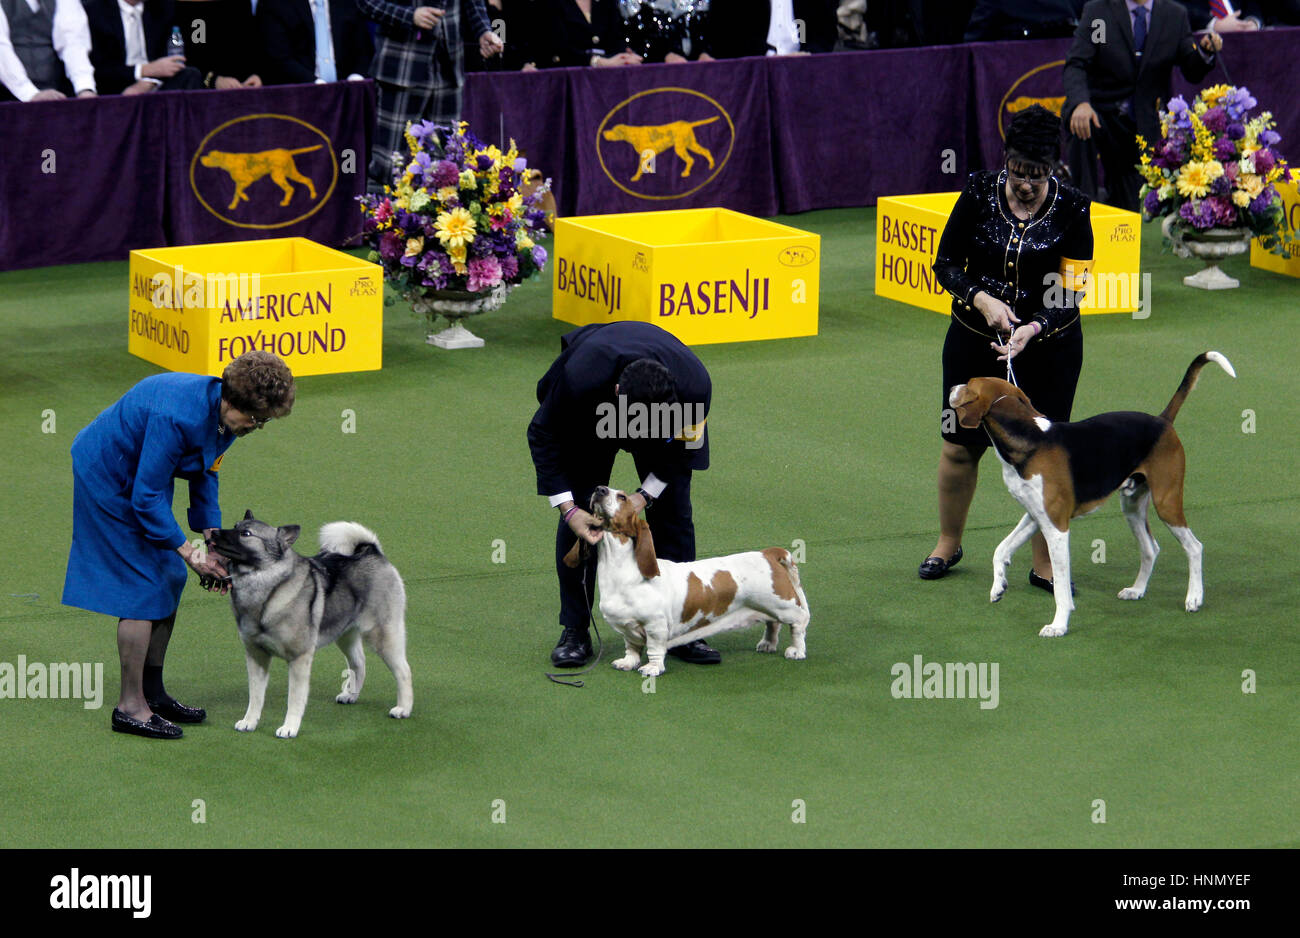 New York, United States. 13th Feb, 2017. Owners tend to their dogs during competition in the Hound Division at the 141st Annual Westminster Dog Show at Madison Square Garden in New York City on February 13th, 2017. Shown here from left to right are the winner of the division, 'Duffie', a Norwegian Elkhound, A Basset Hound and an English Fox Hound Credit: Adam Stoltman/Alamy Live News Stock Photo